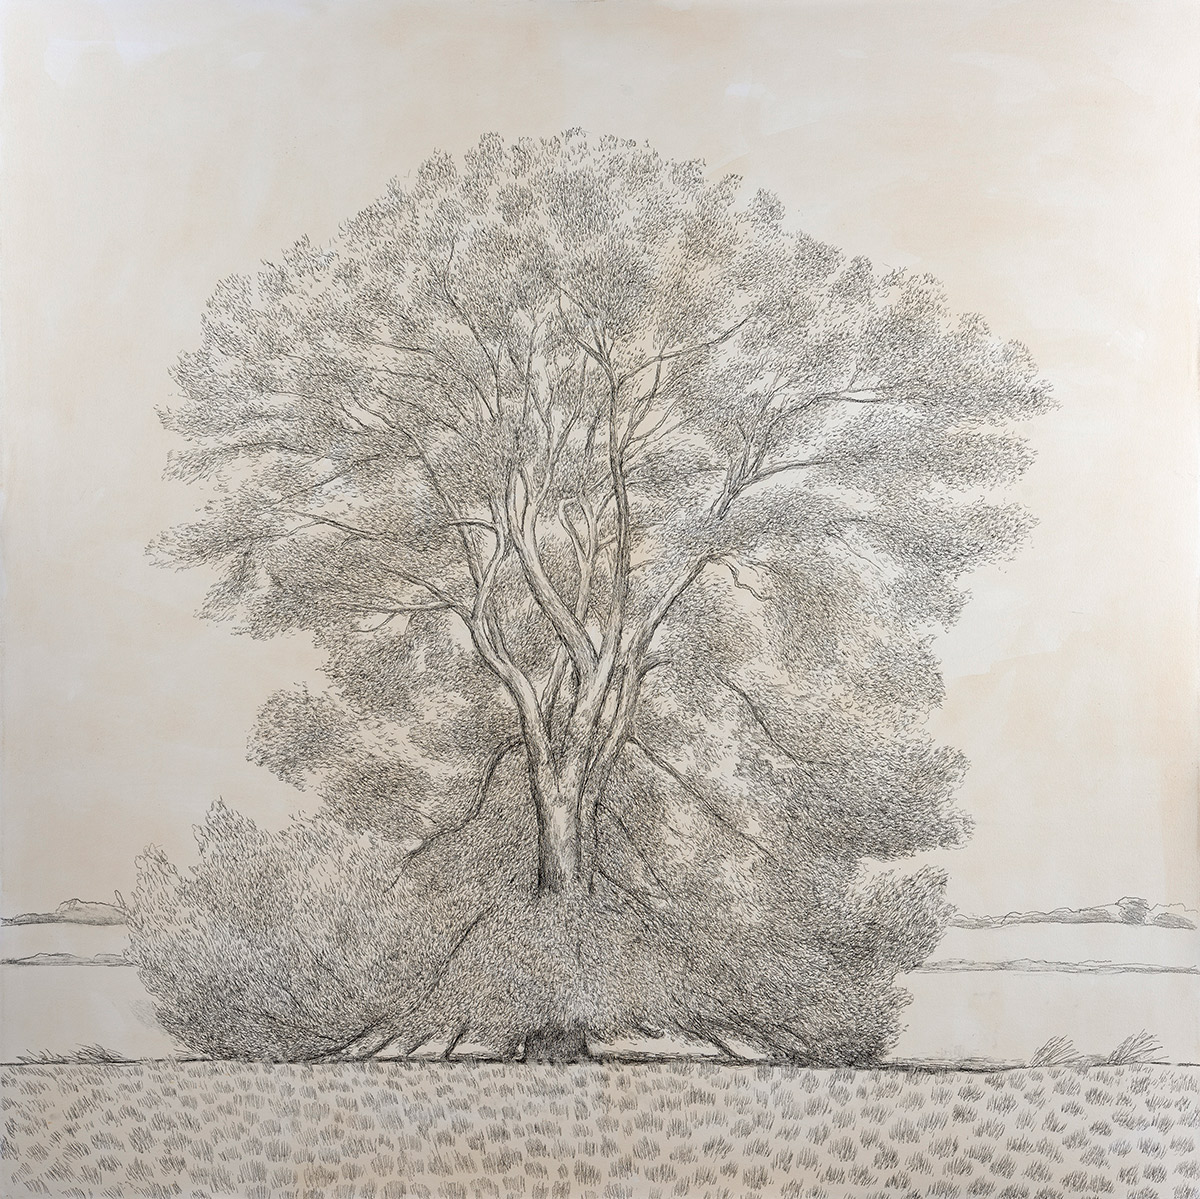 David-Inshaw-Willow-Tree-2019-pencil-on-paper-122cm-square